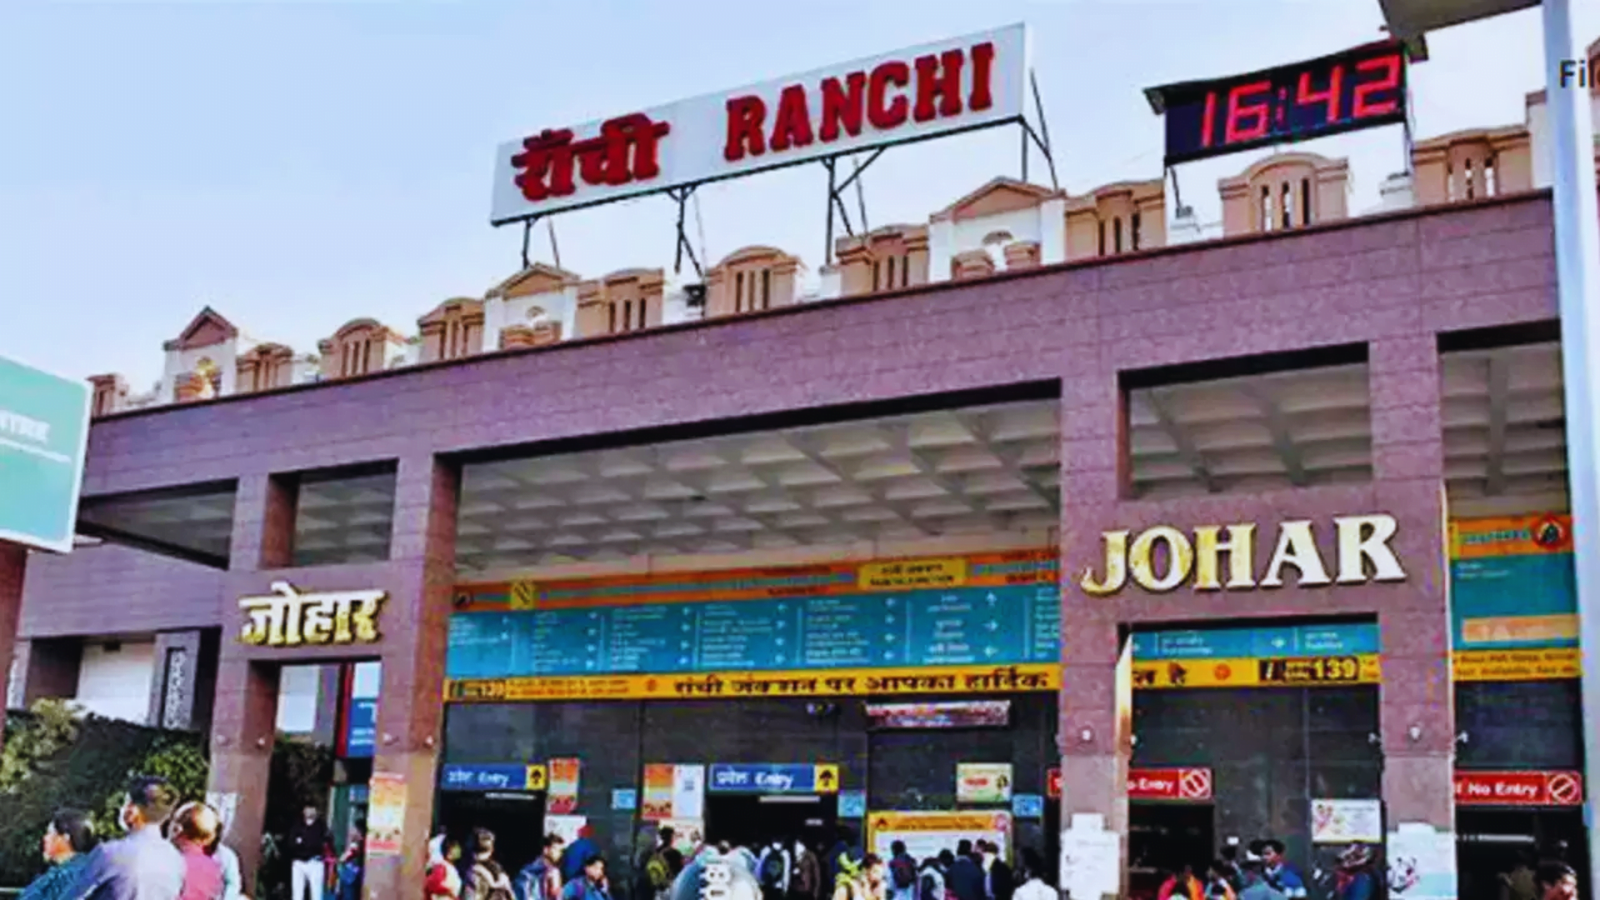 Ranchi Railway Station Transformation Airport-Like Makeover by 2025